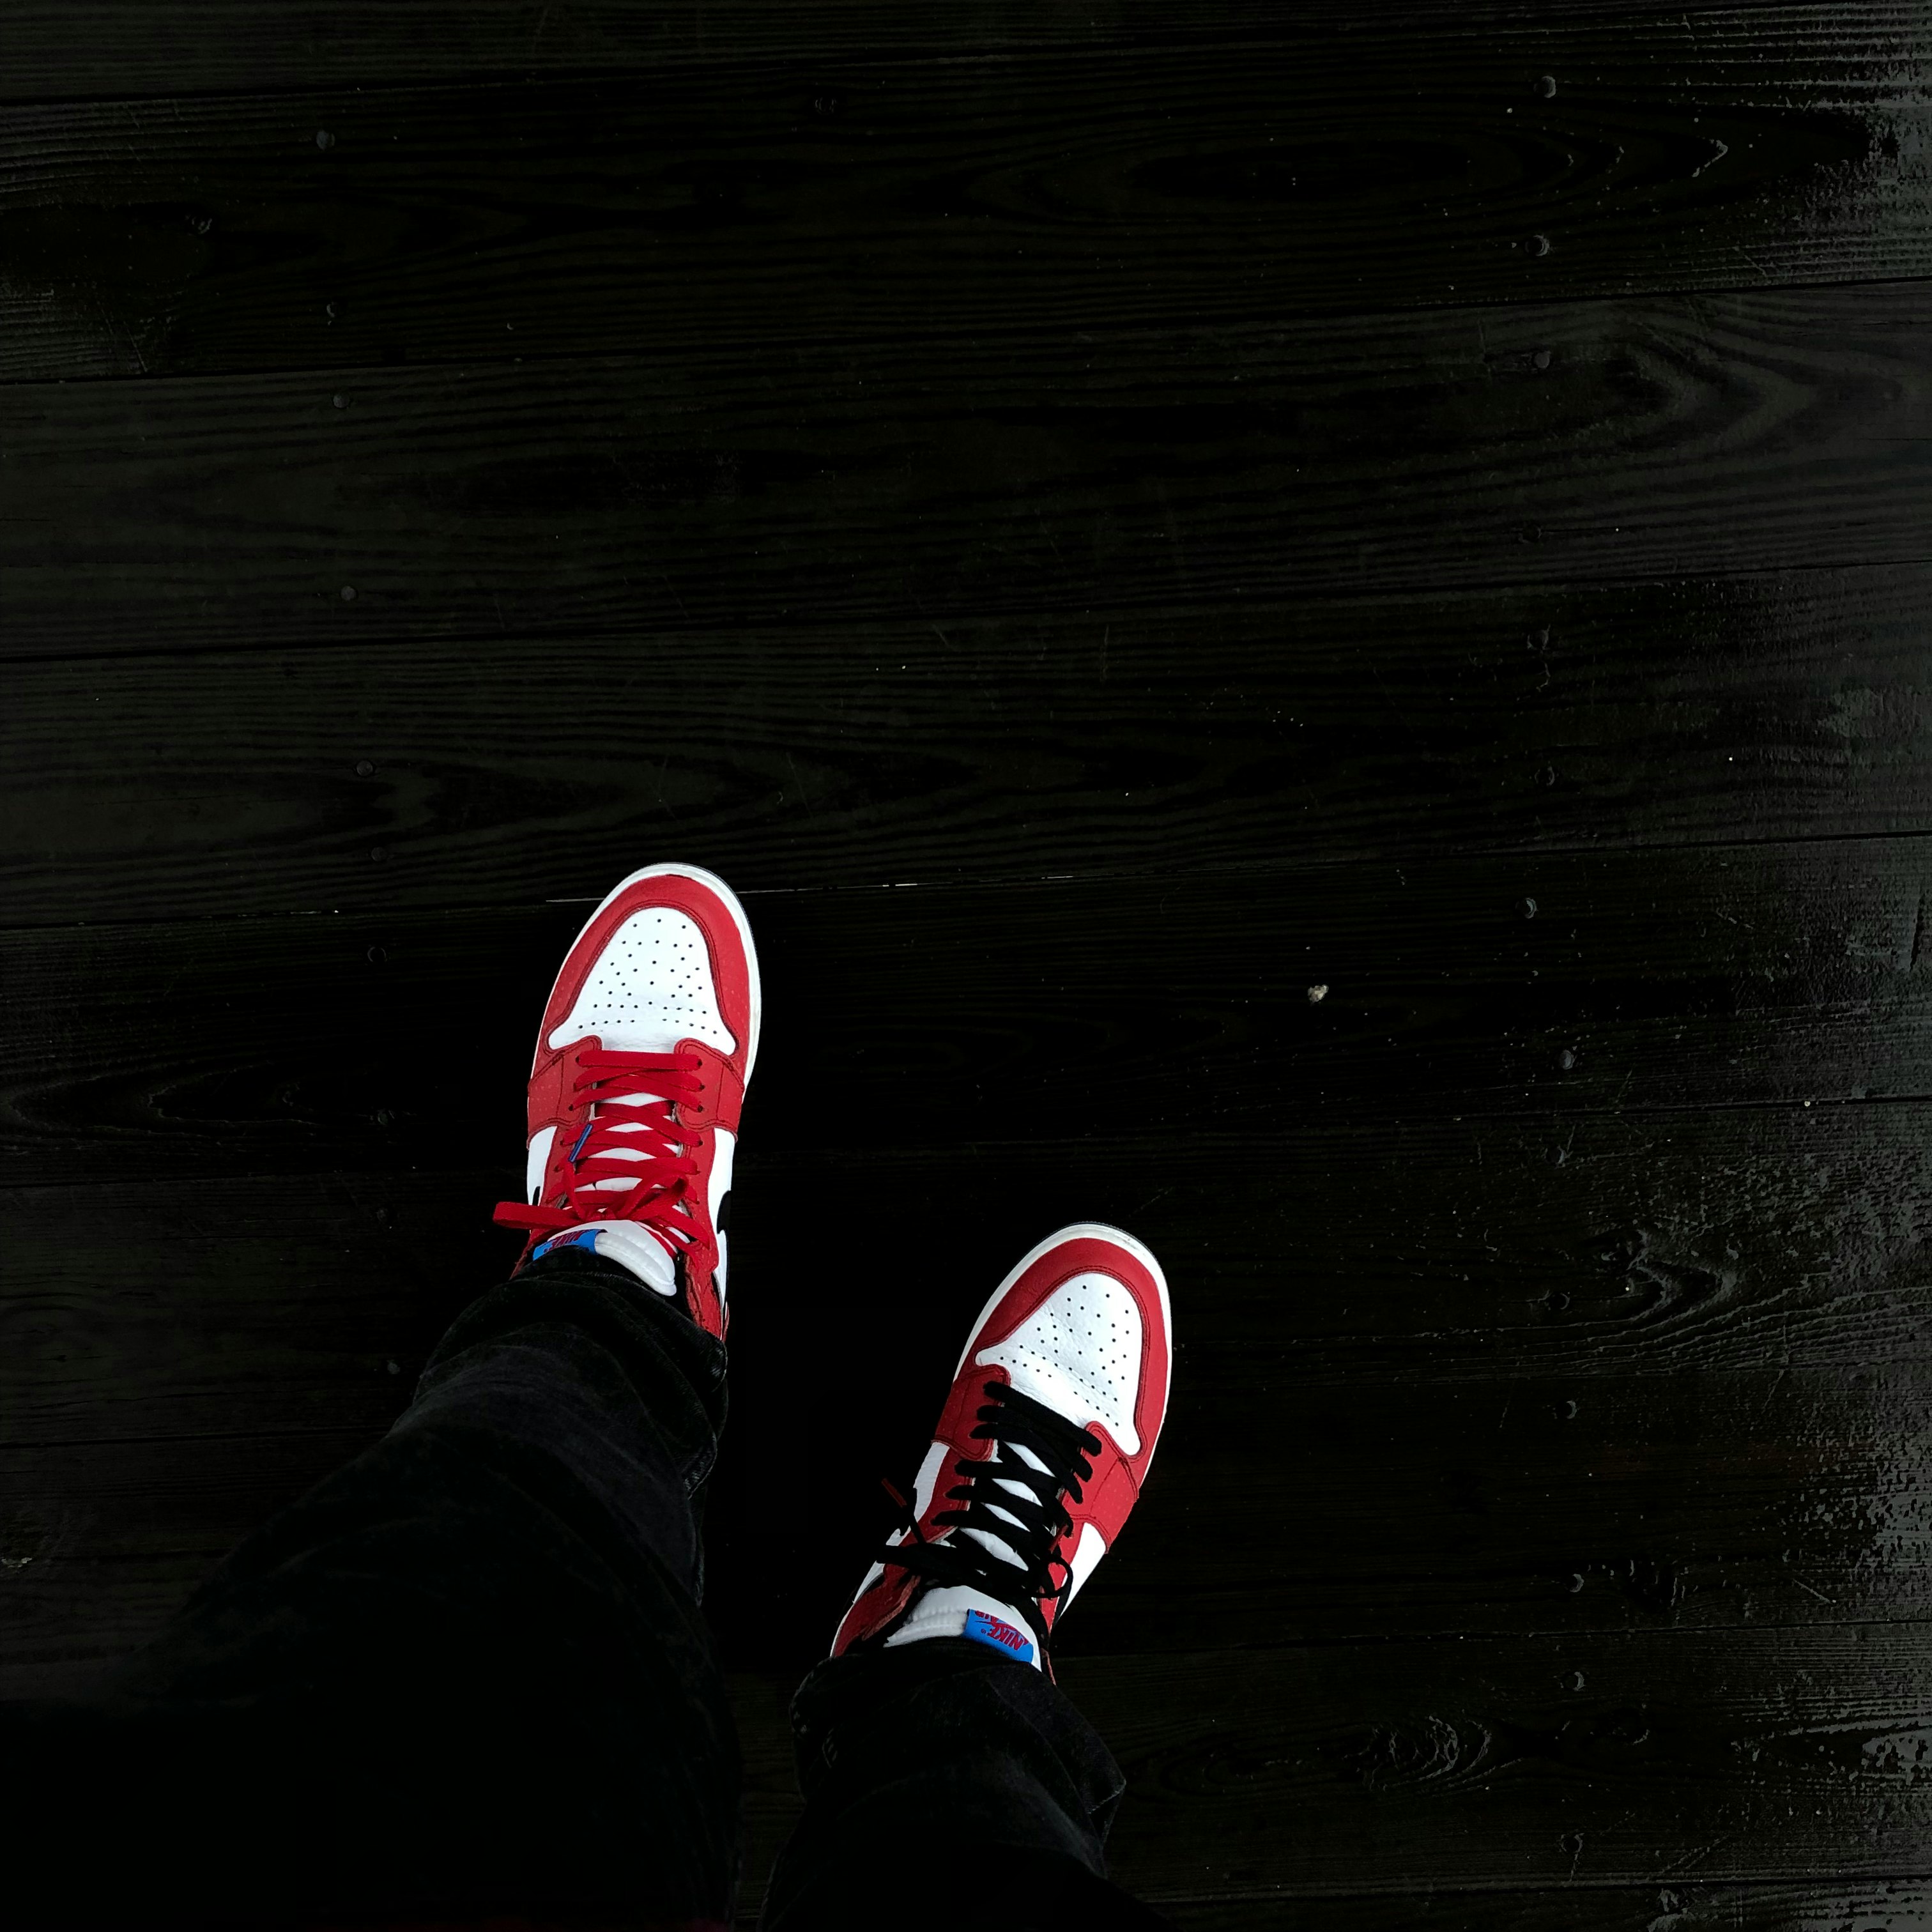 person in black pants and red sneakers